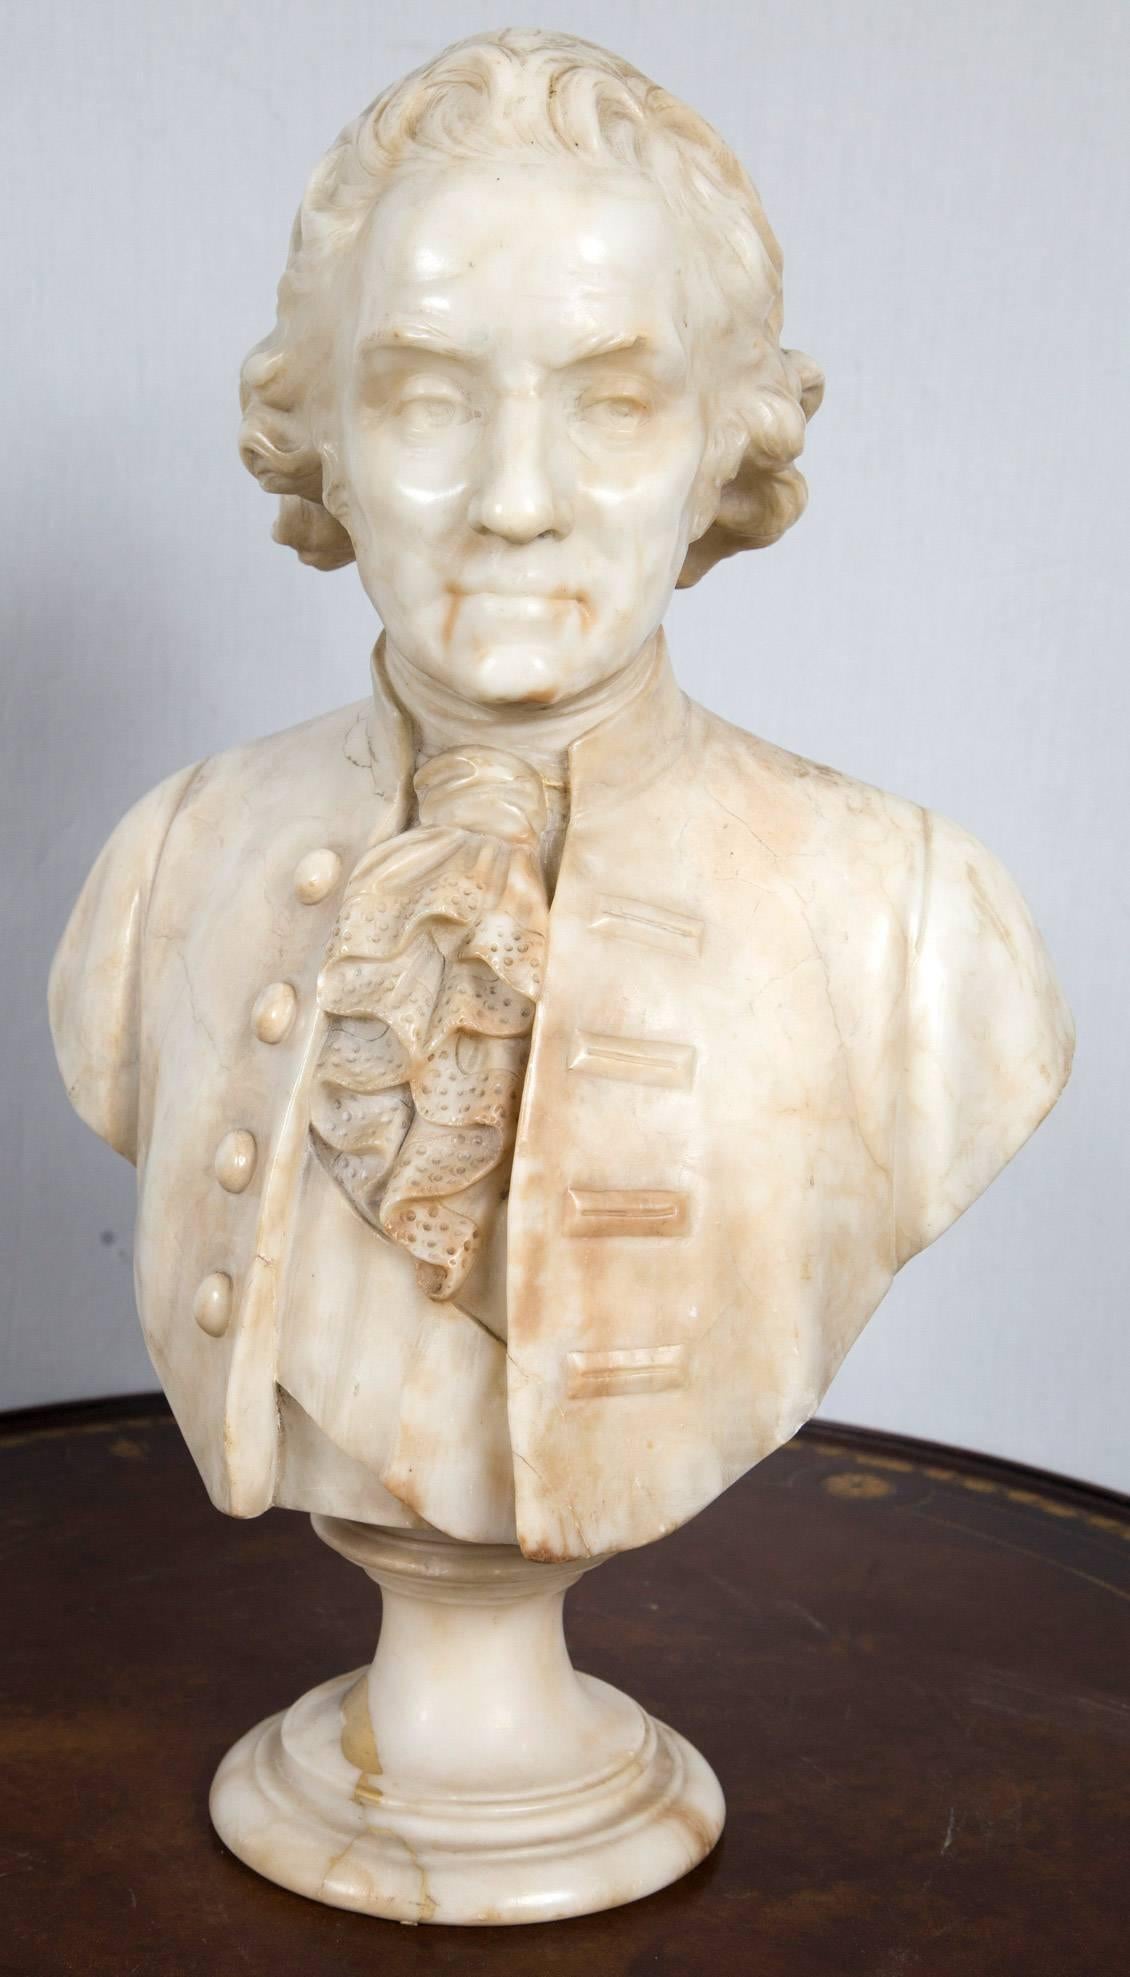 Jefferson wearing an open coat with a cravat at his neck. Raised on a socle.
Signed on the back A.Cipriani (active 1880-1930).

